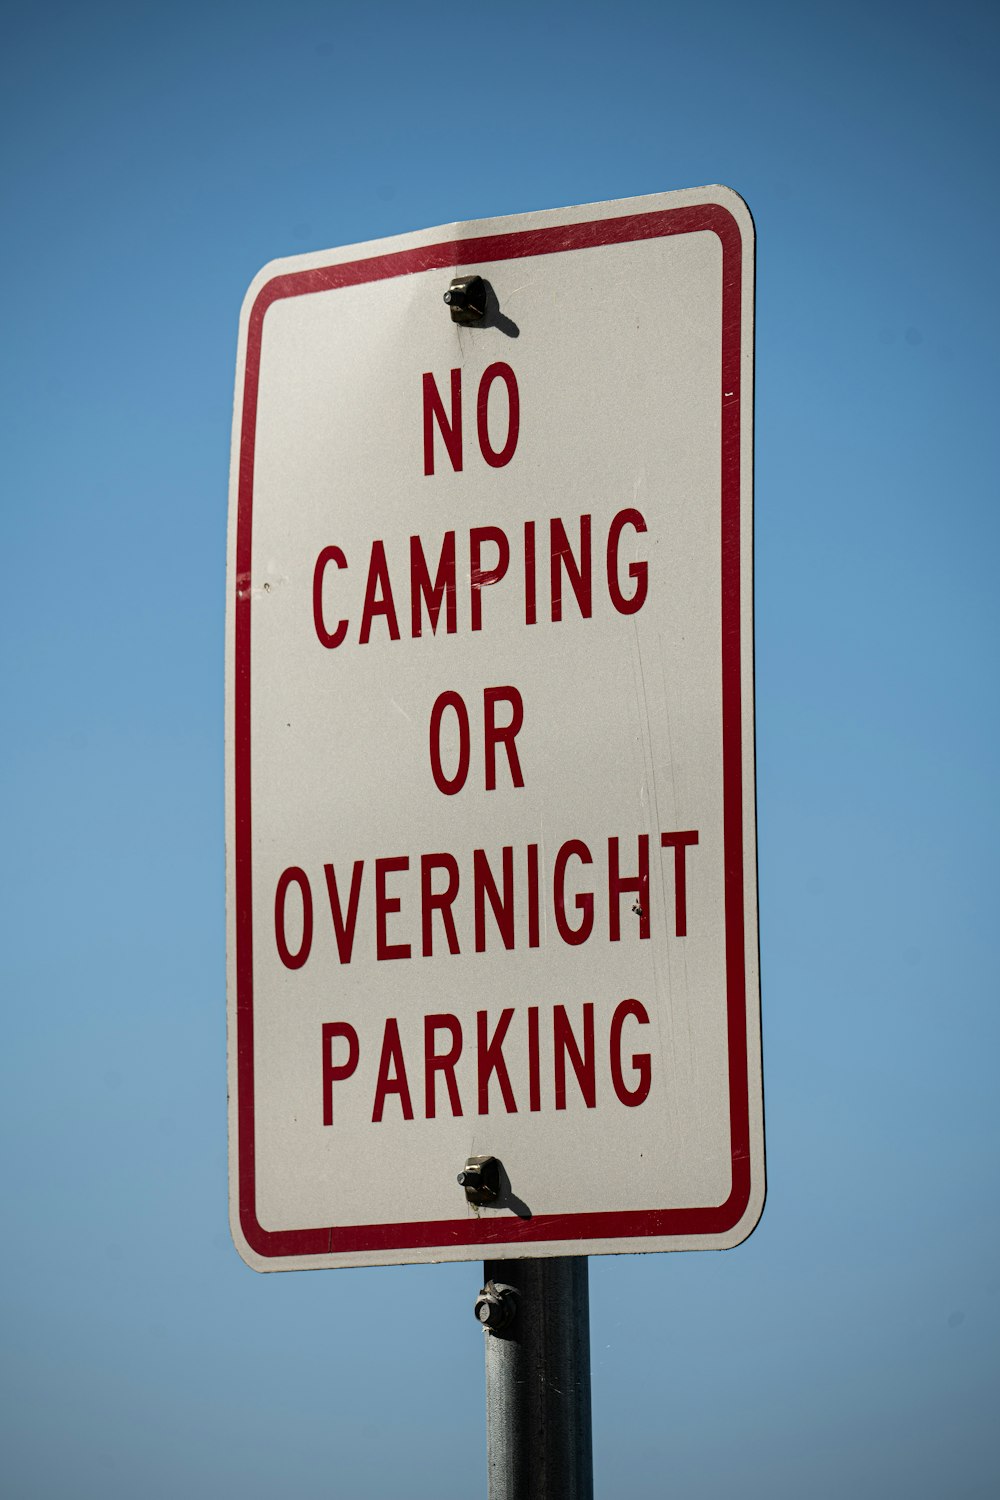 a no camping or overnight parking sign on a pole